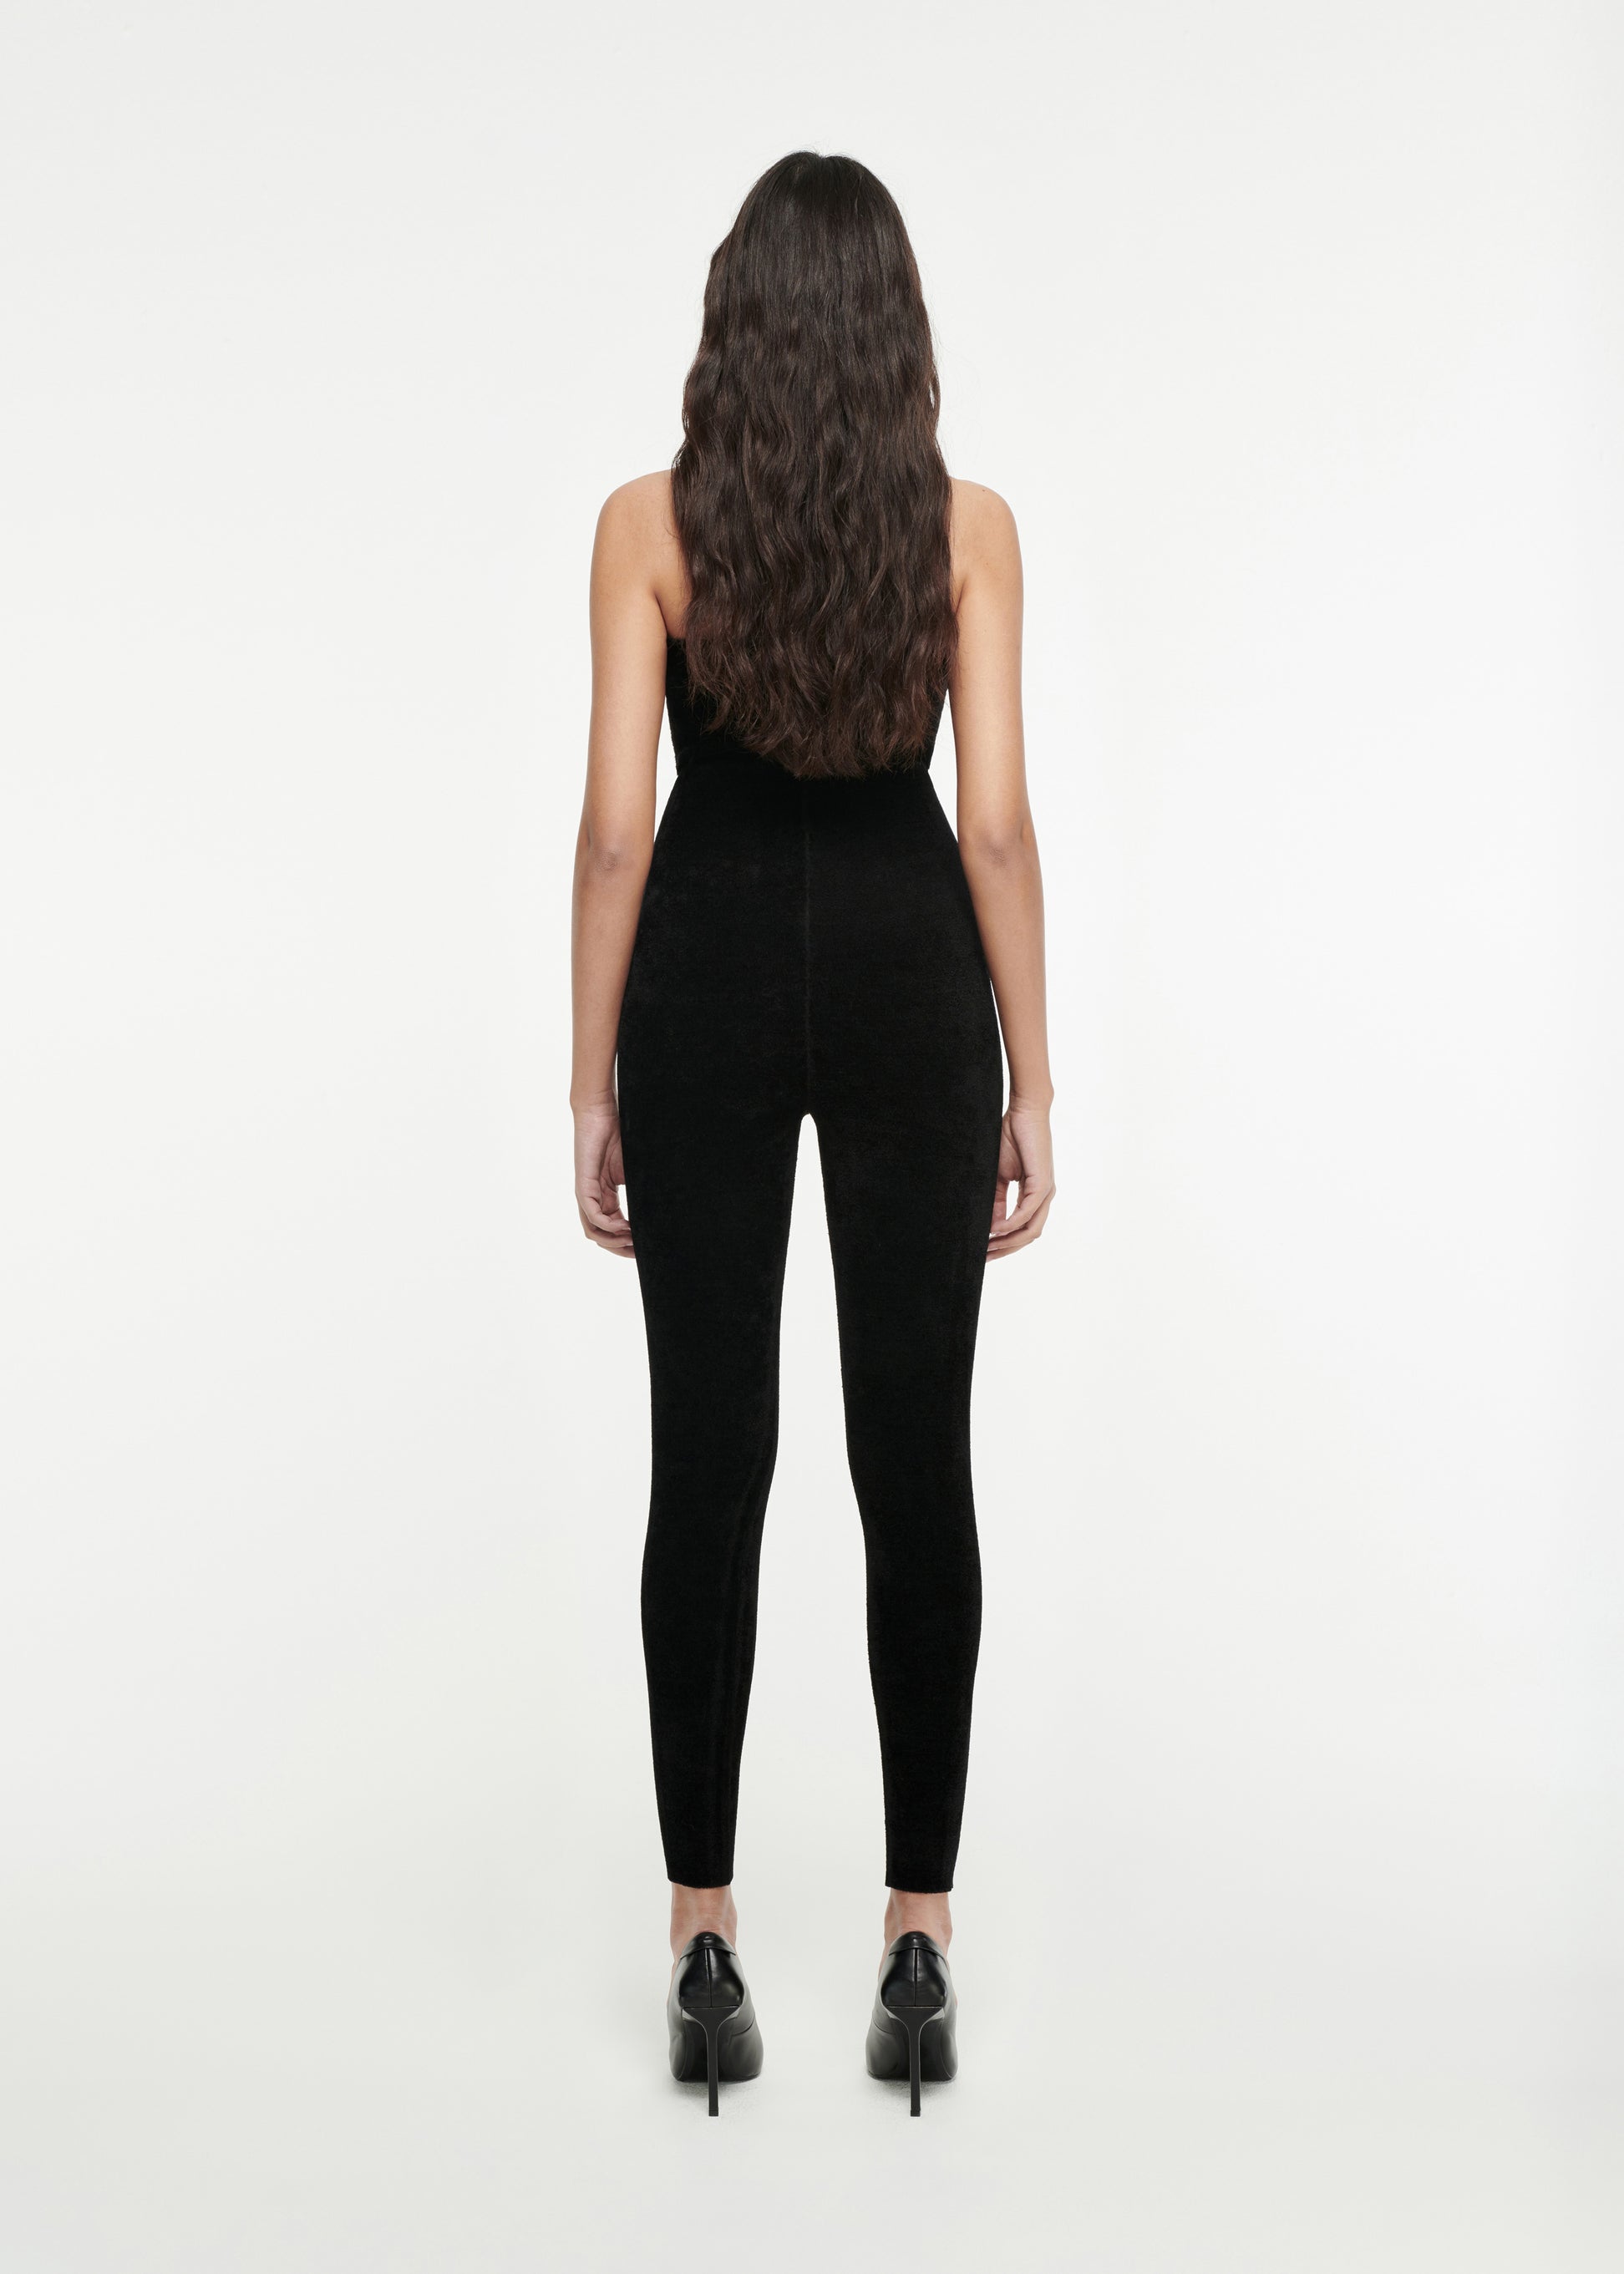 The back of a woman wearing the Strapless Chenille Knit Jumpsuit in Black